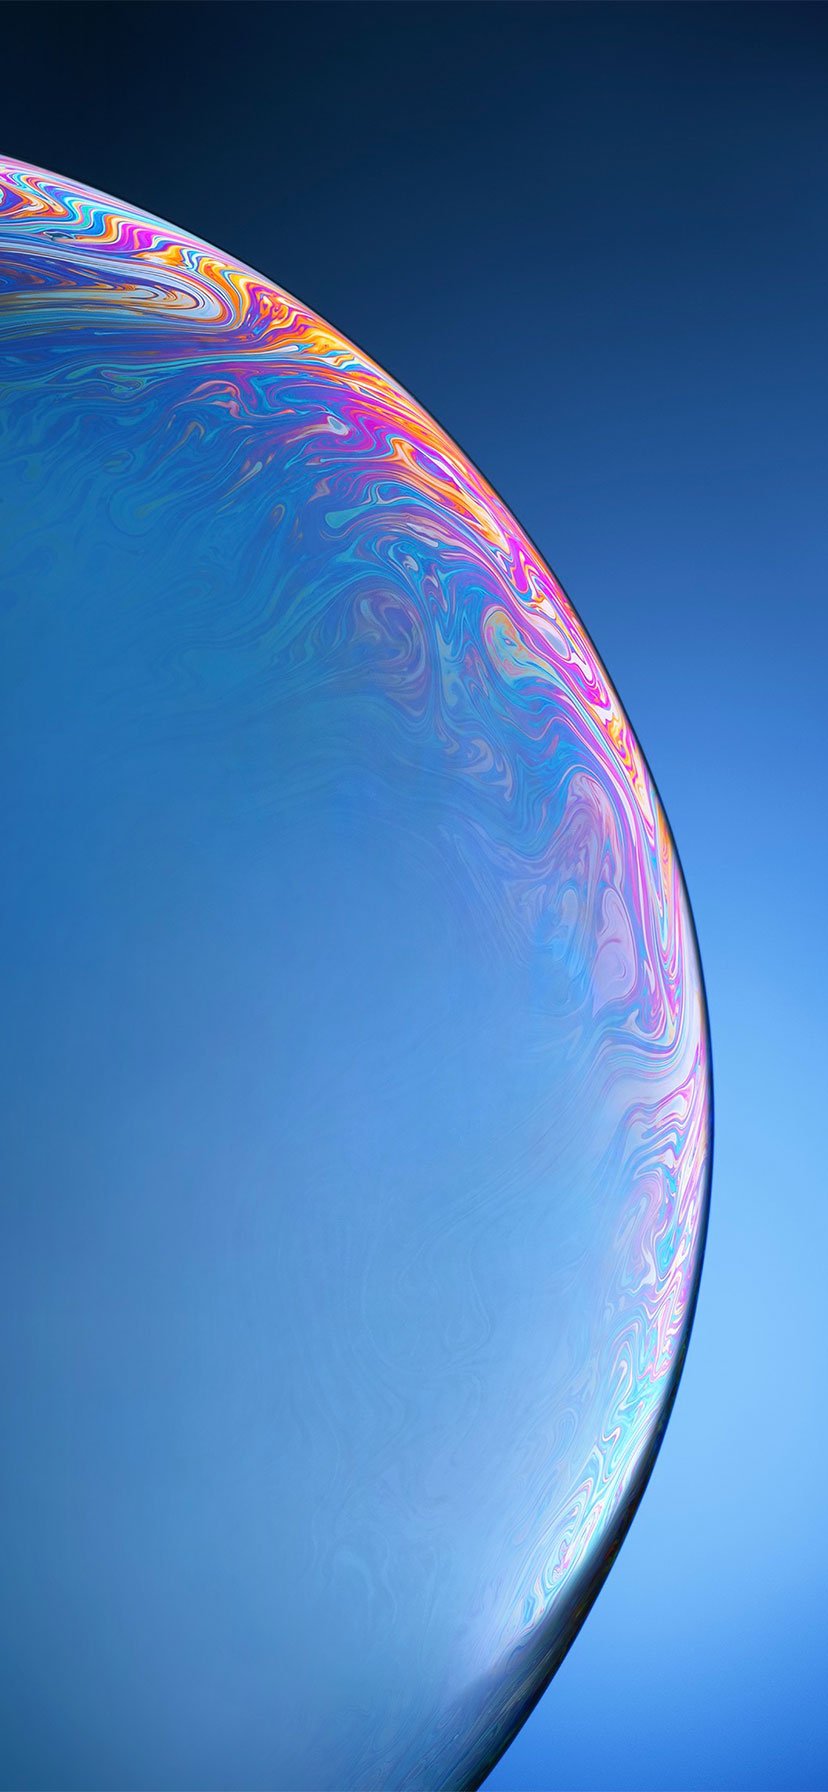 50+ Best High Quality iPhone XR Wallpapers & Backgrounds ...